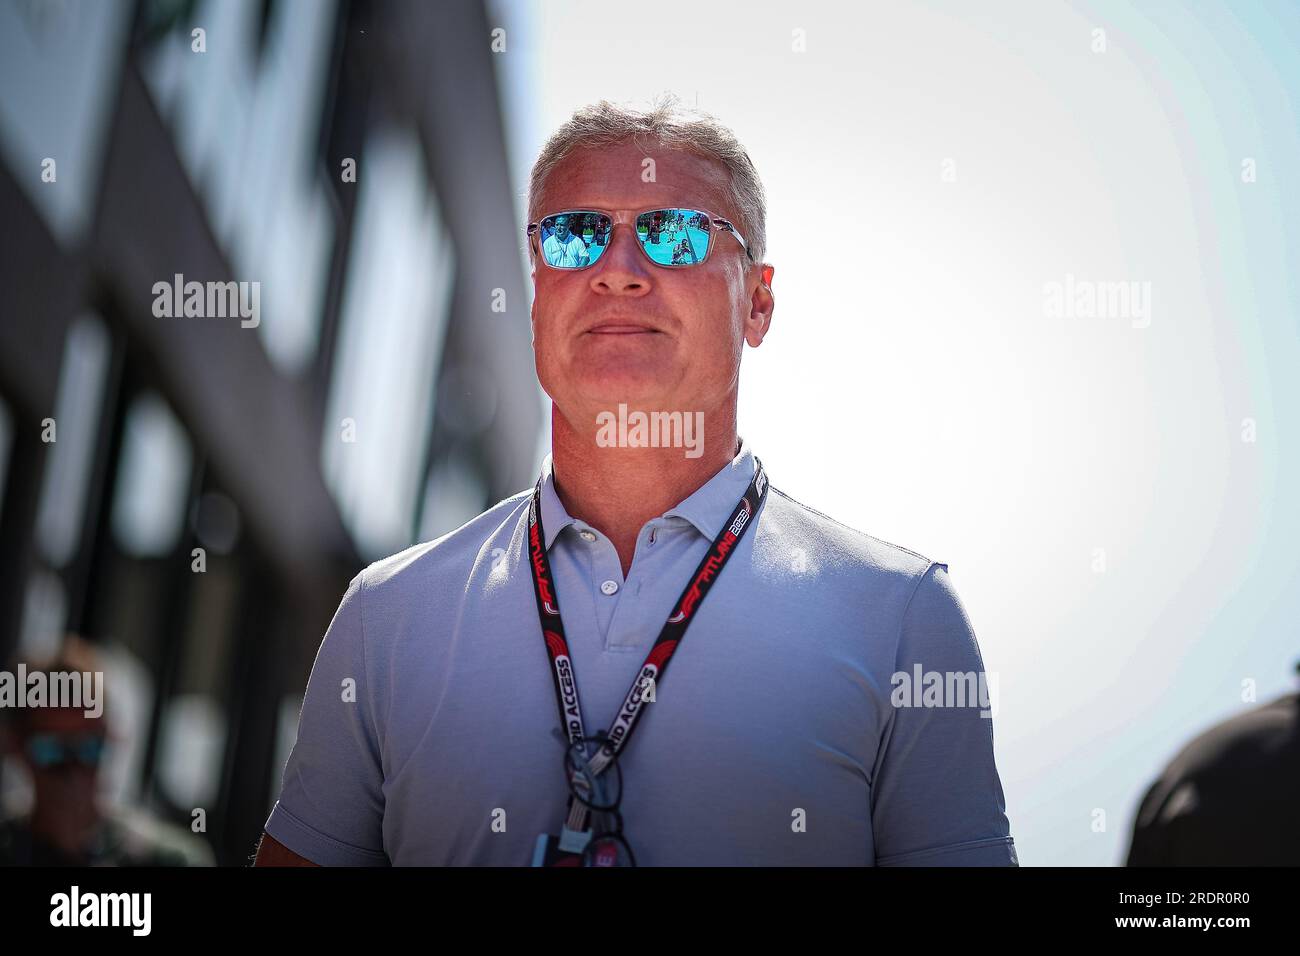 David Coulthard (GRB) former f1 driver, with RedBull Racing, McLaren and Williams, now TV commentator, during the Hungarian GP, Budapest 20-23 July 2023 at the Hungaroring, Formula 1 World championship 2023 Stock Photo